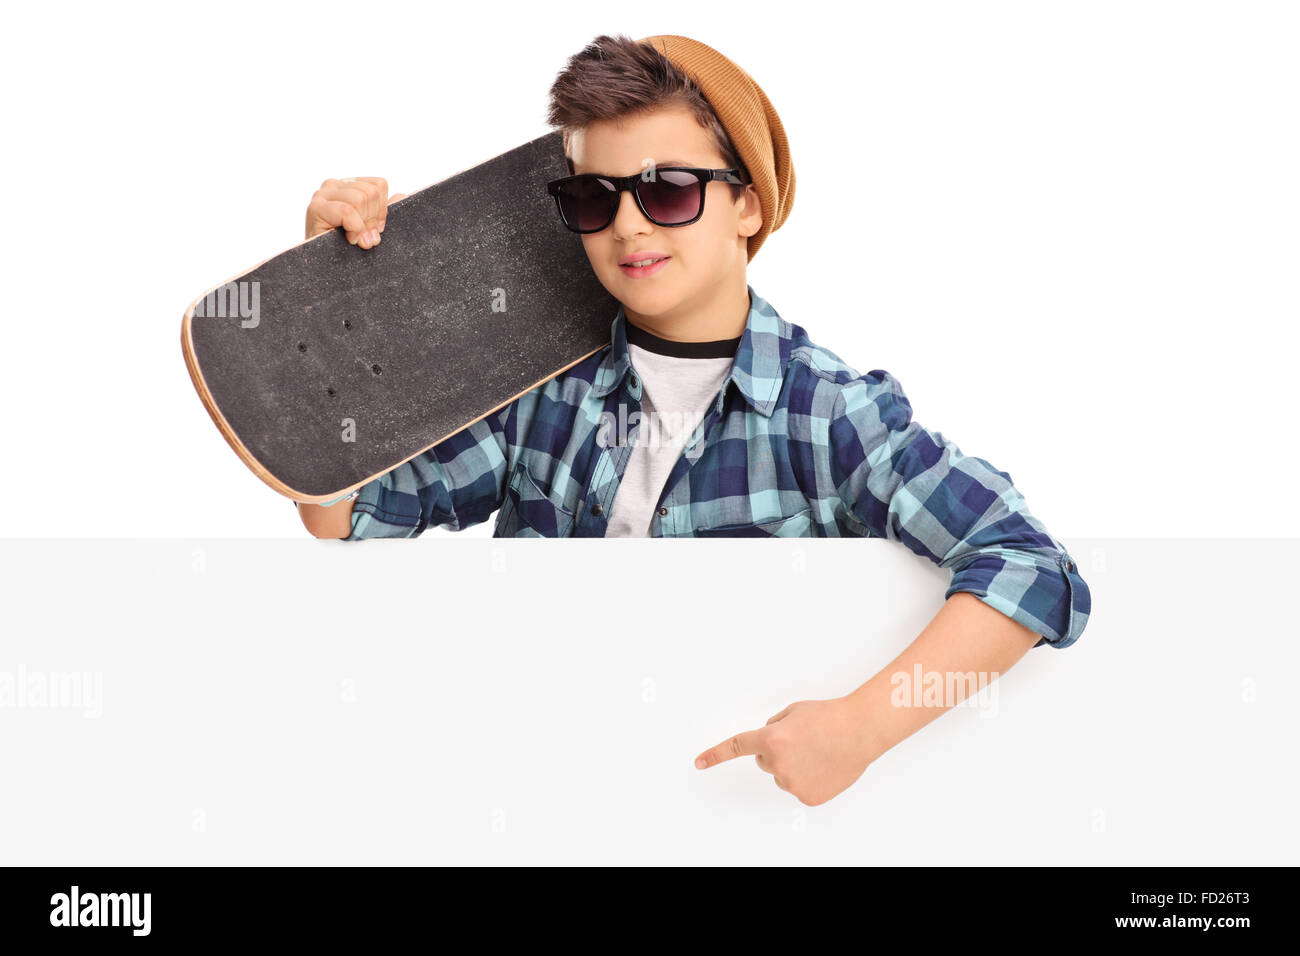 Cool kid holding a skateboard and pointing on a blank panel with his hand isolated on white background Stock Photo